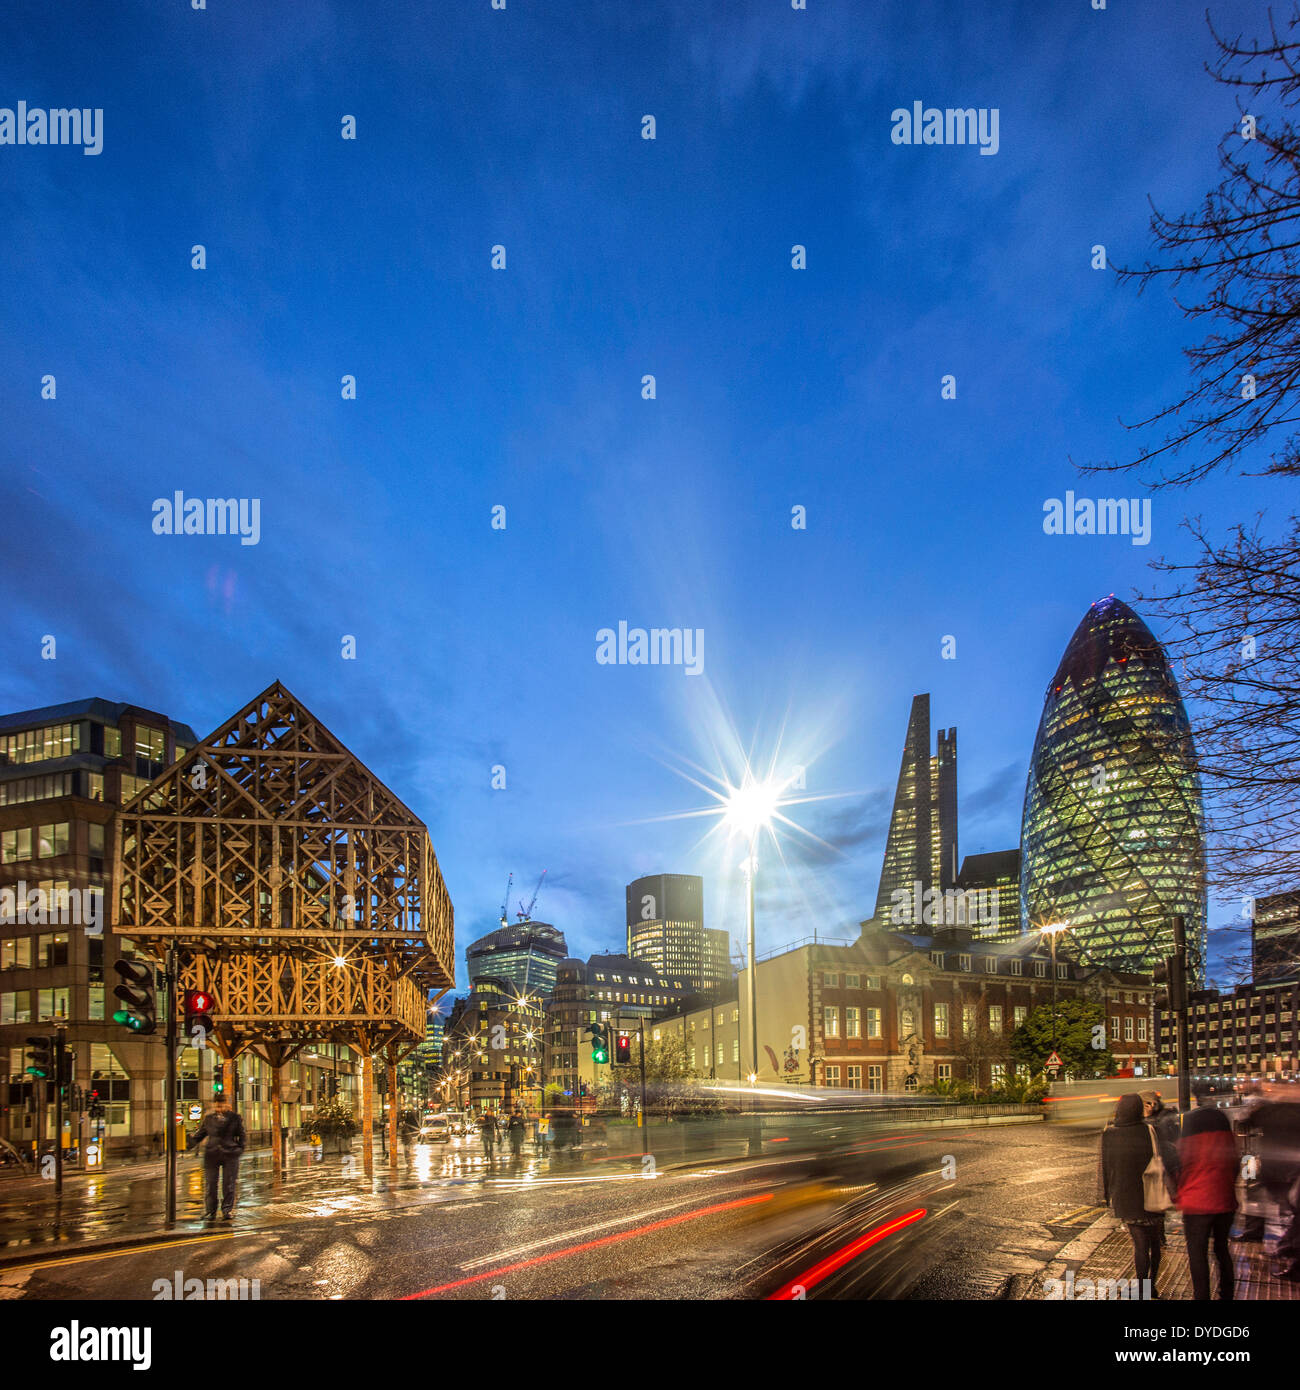 The location of the historic Aldgate where Chaucer lived from 1374-1386. Stock Photo